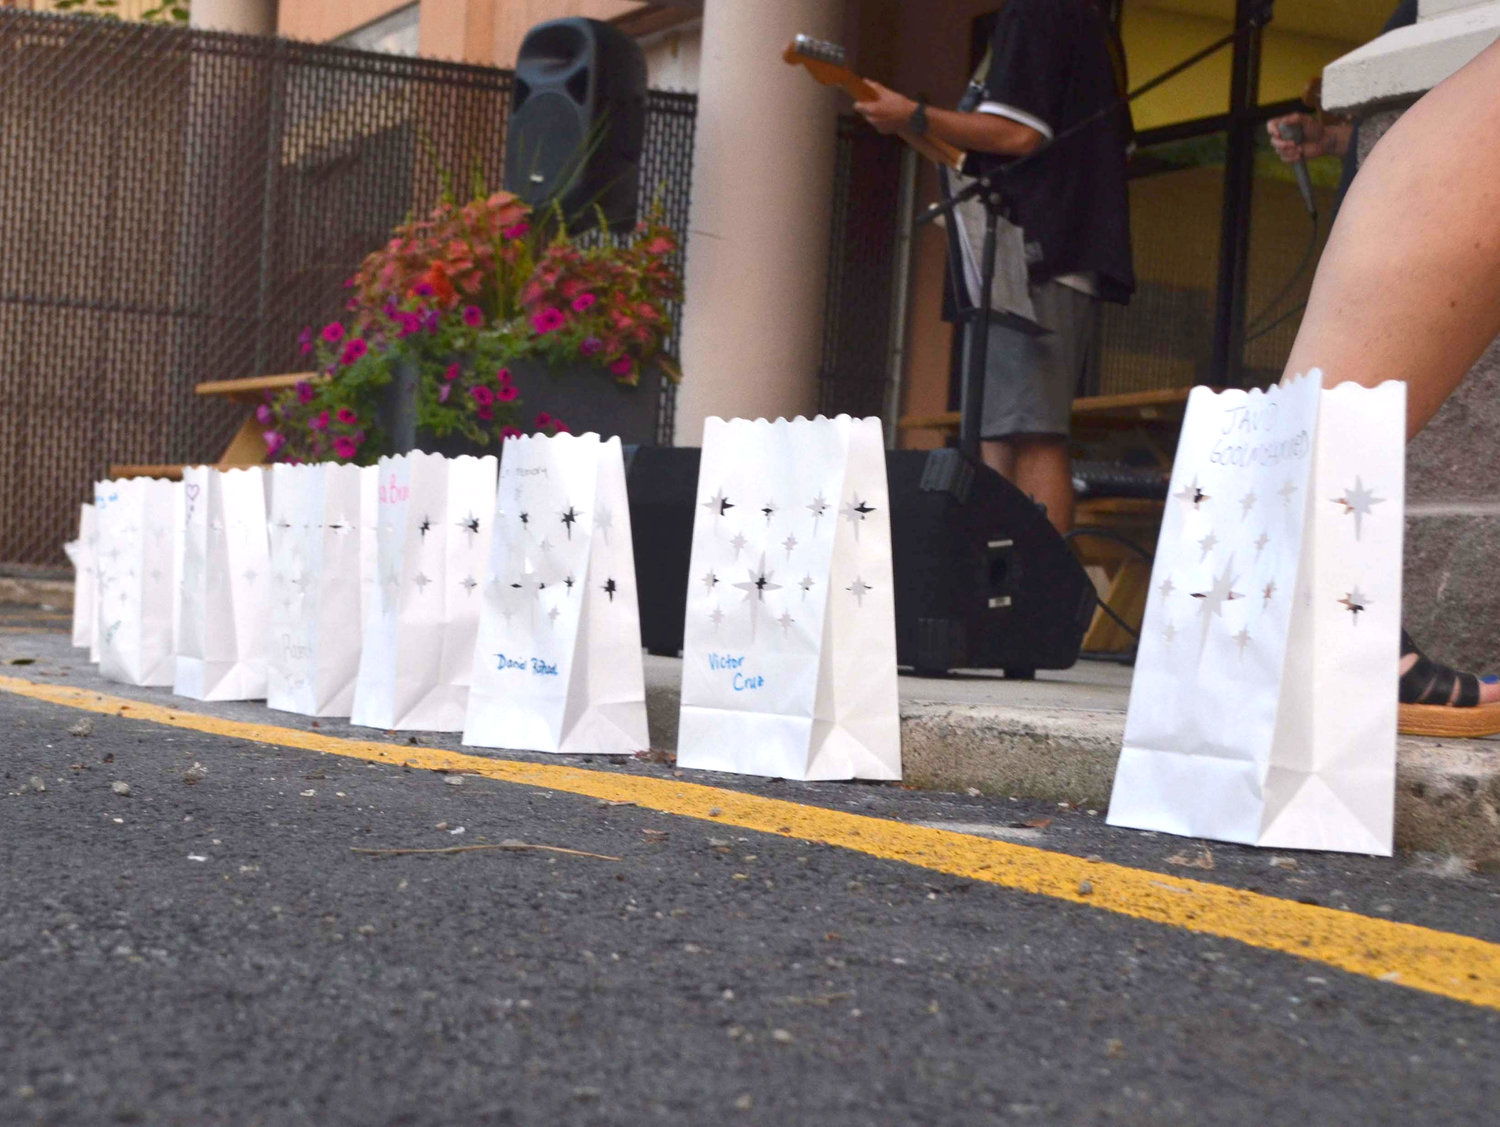 The names of those lost to overdose in Sullivan County stand written on paper bags at the vigil for International Overdose Awareness Day.